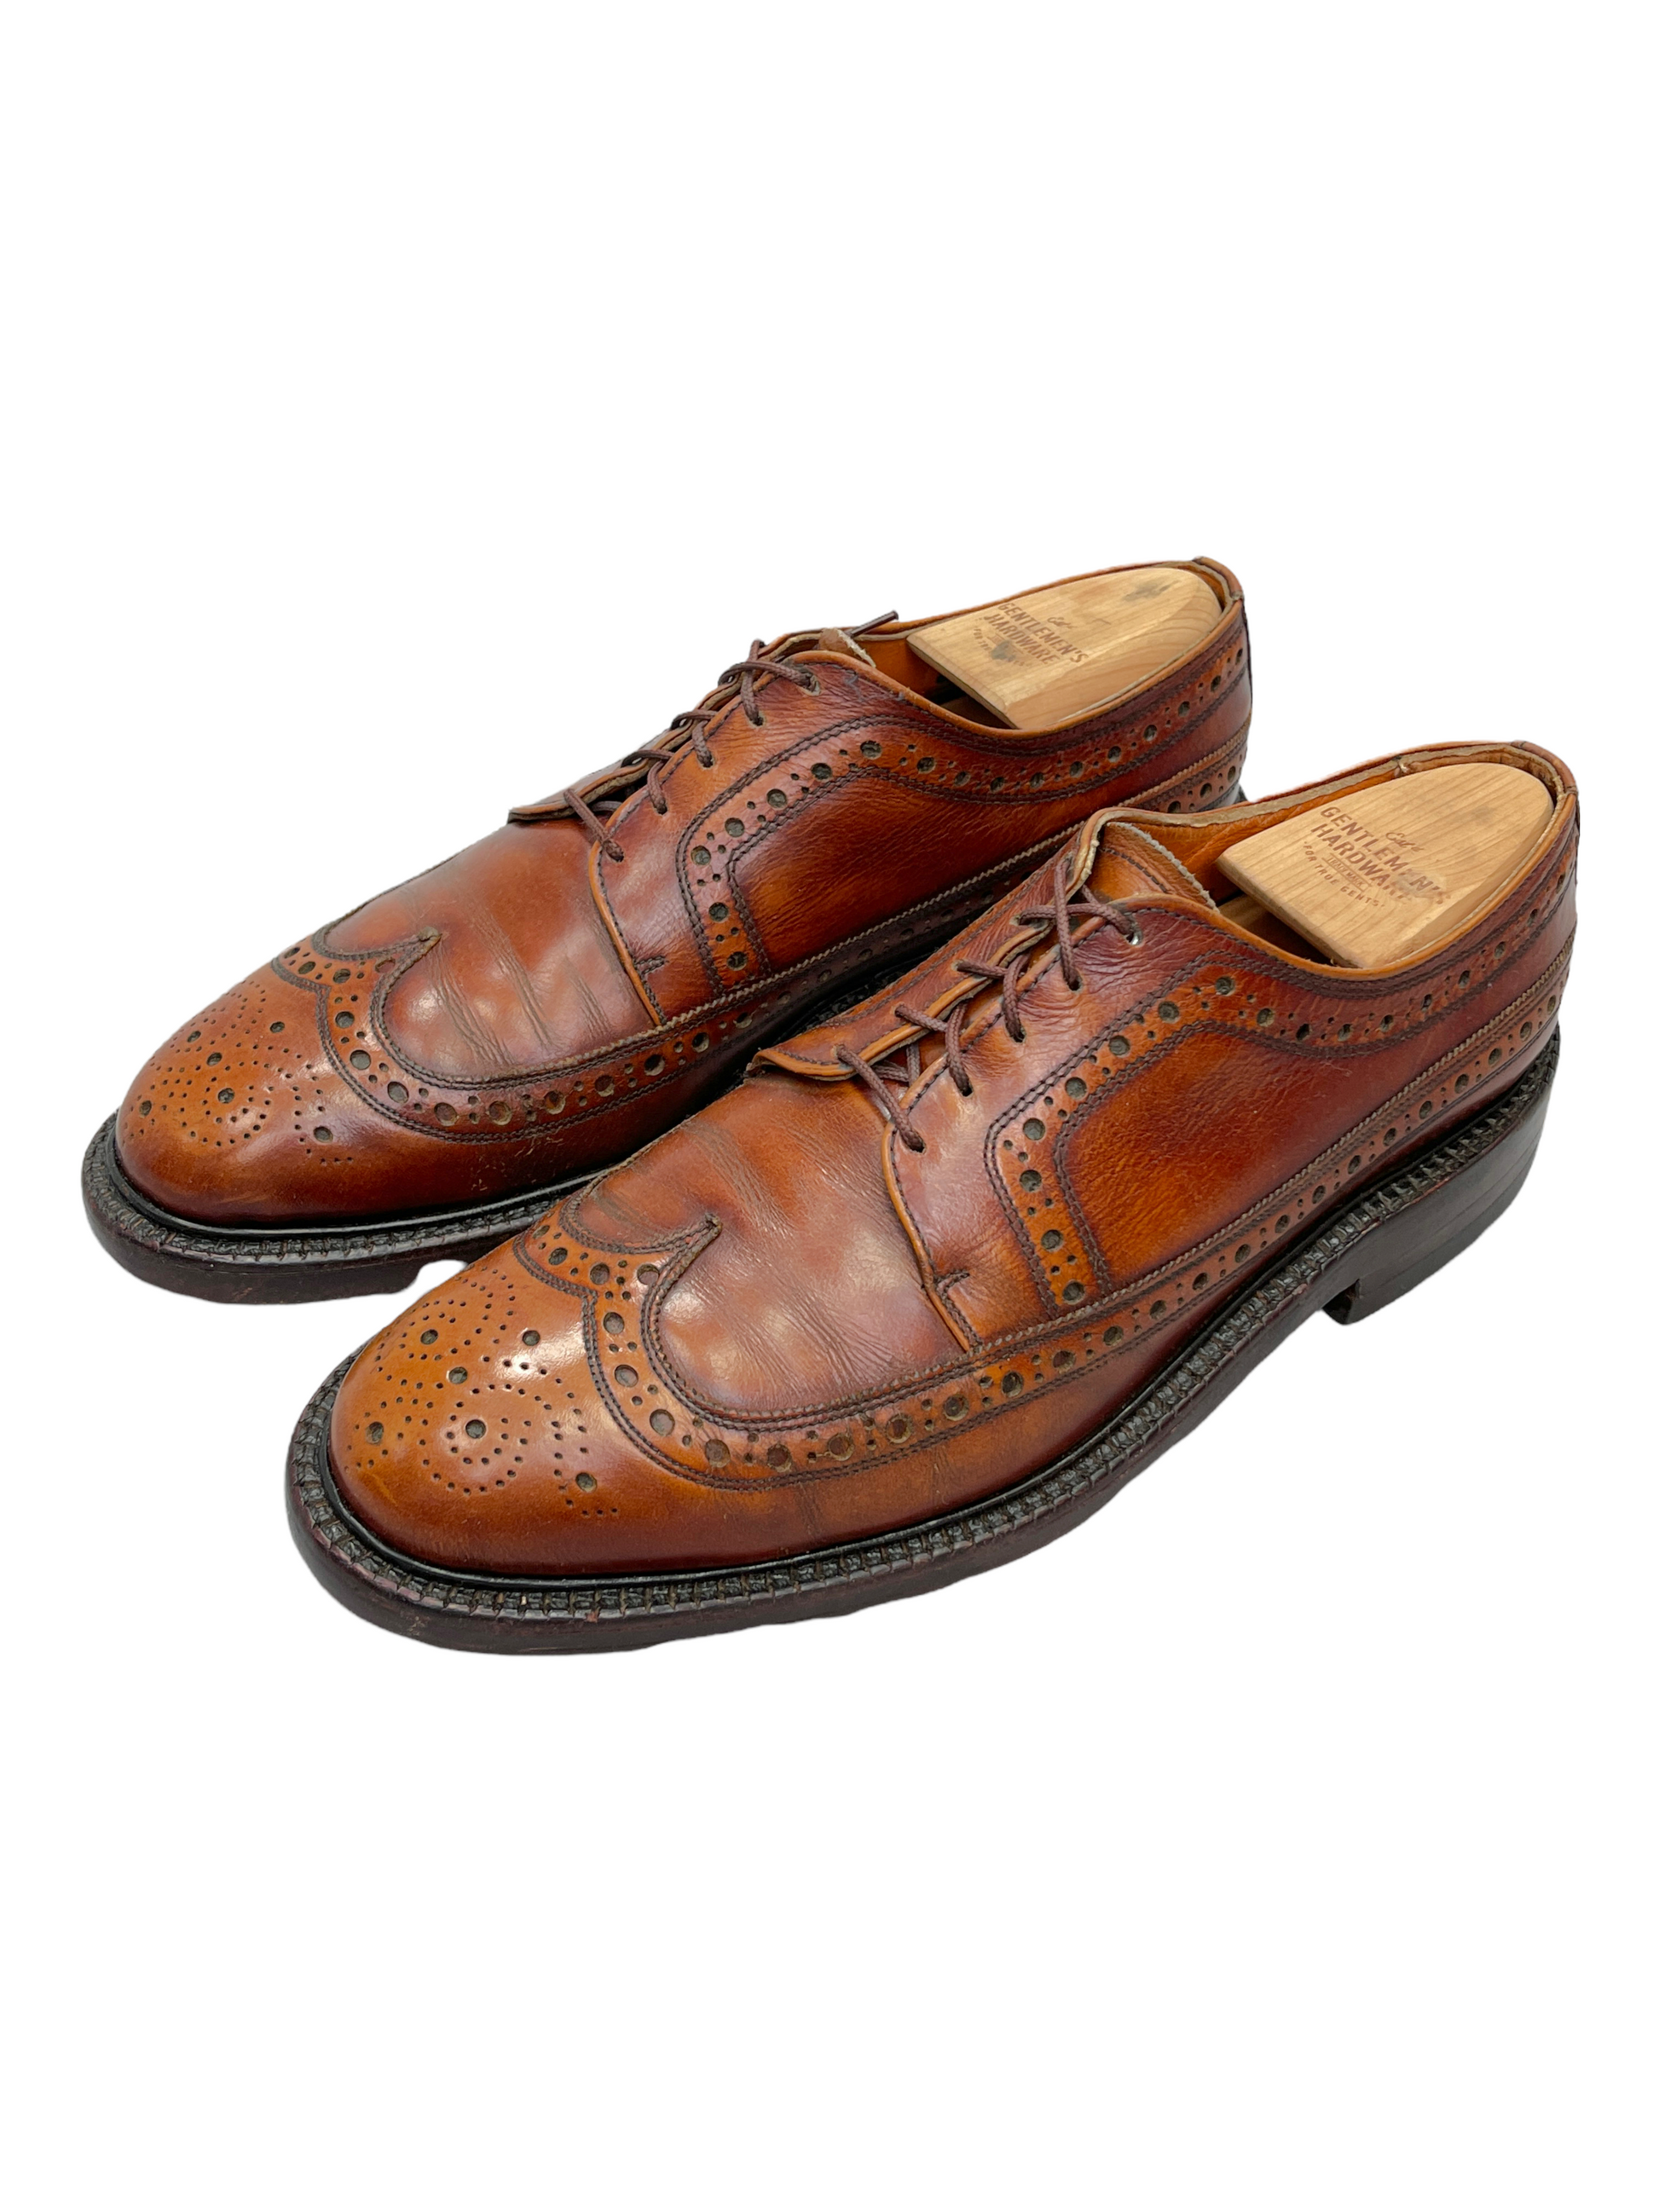 Florsheim Imperial Collection Brown Leather Oxford Dress Shoe 8 D US — Genuine Design luxury consignment Calgary, Canada New & pre-owned clothing, shoes, accessories.